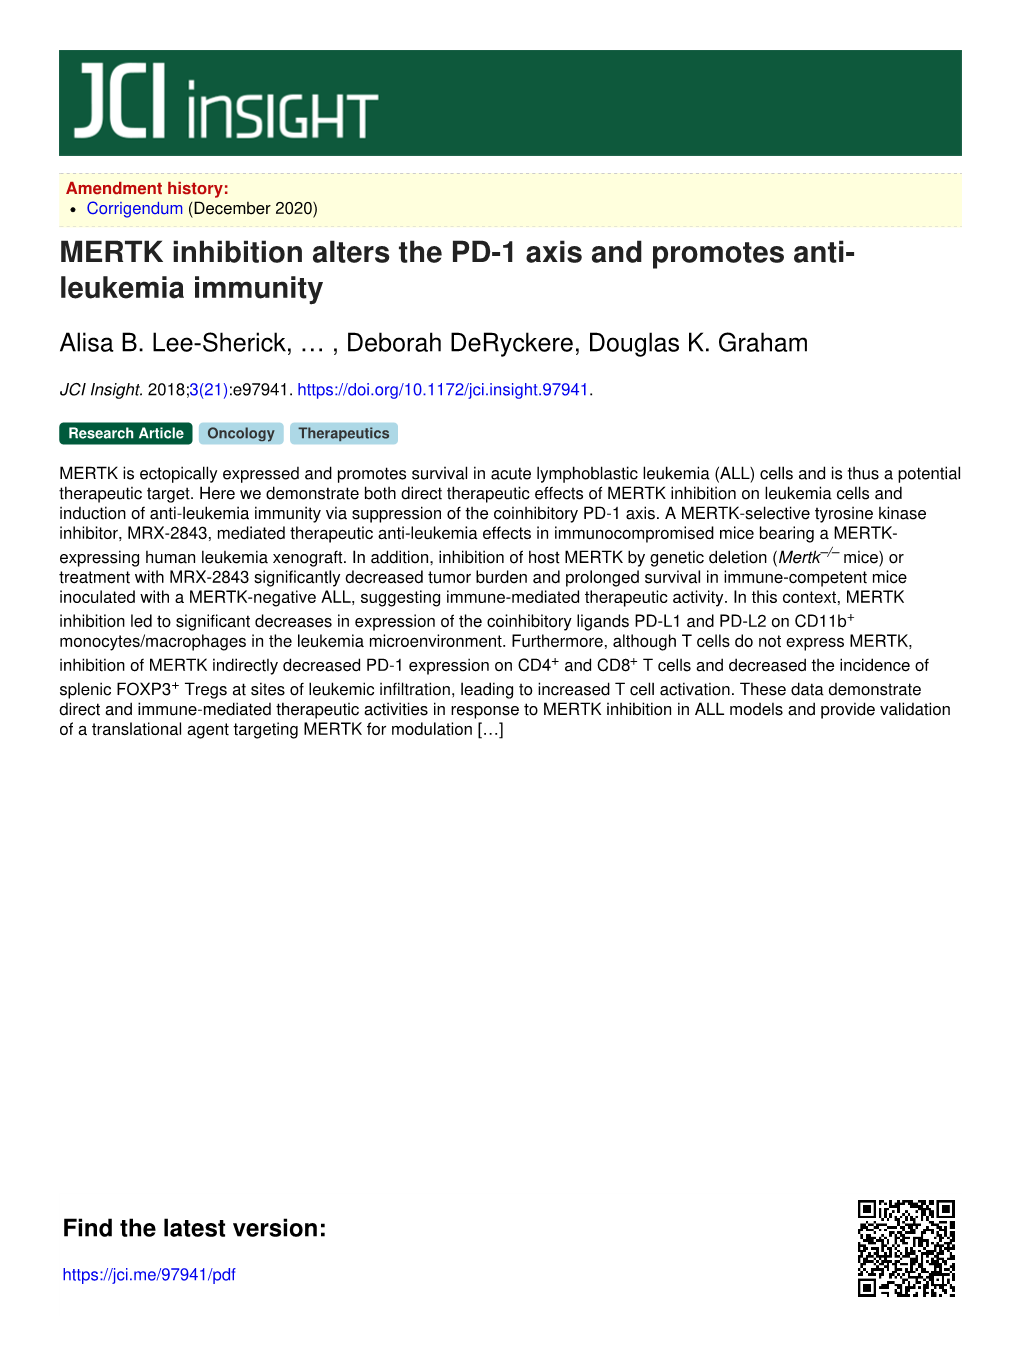 MERTK Inhibition Alters the PD-1 Axis and Promotes Anti- Leukemia Immunity